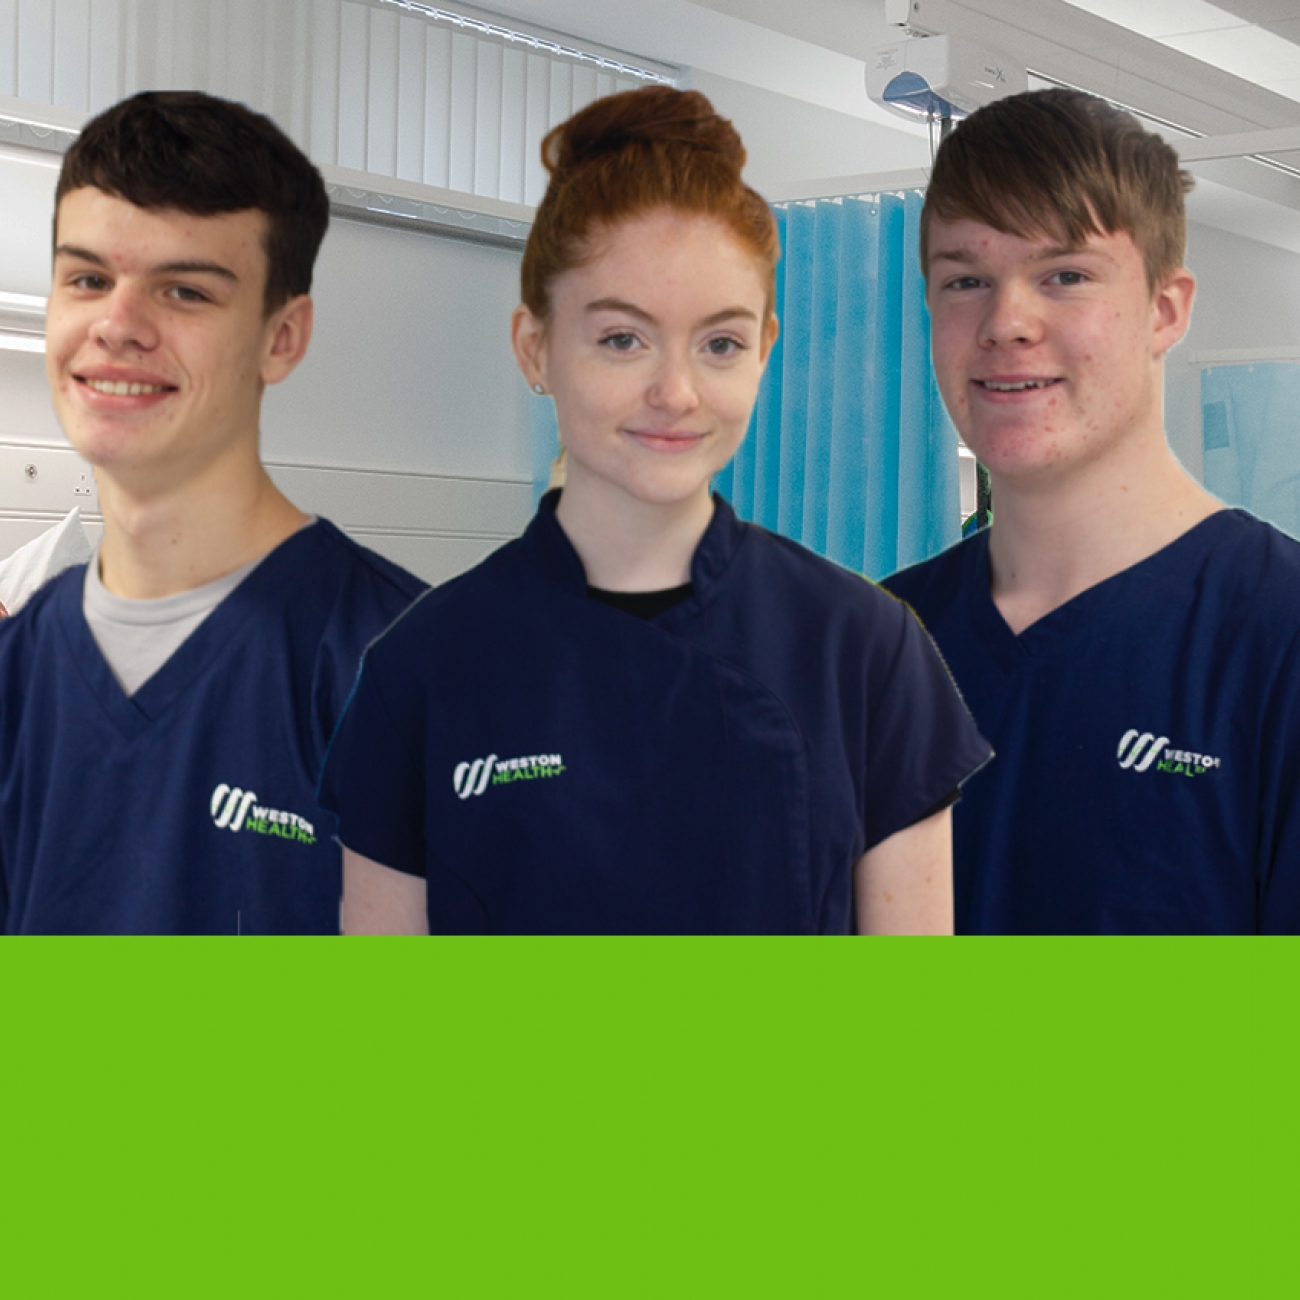 World Skills health and social care students